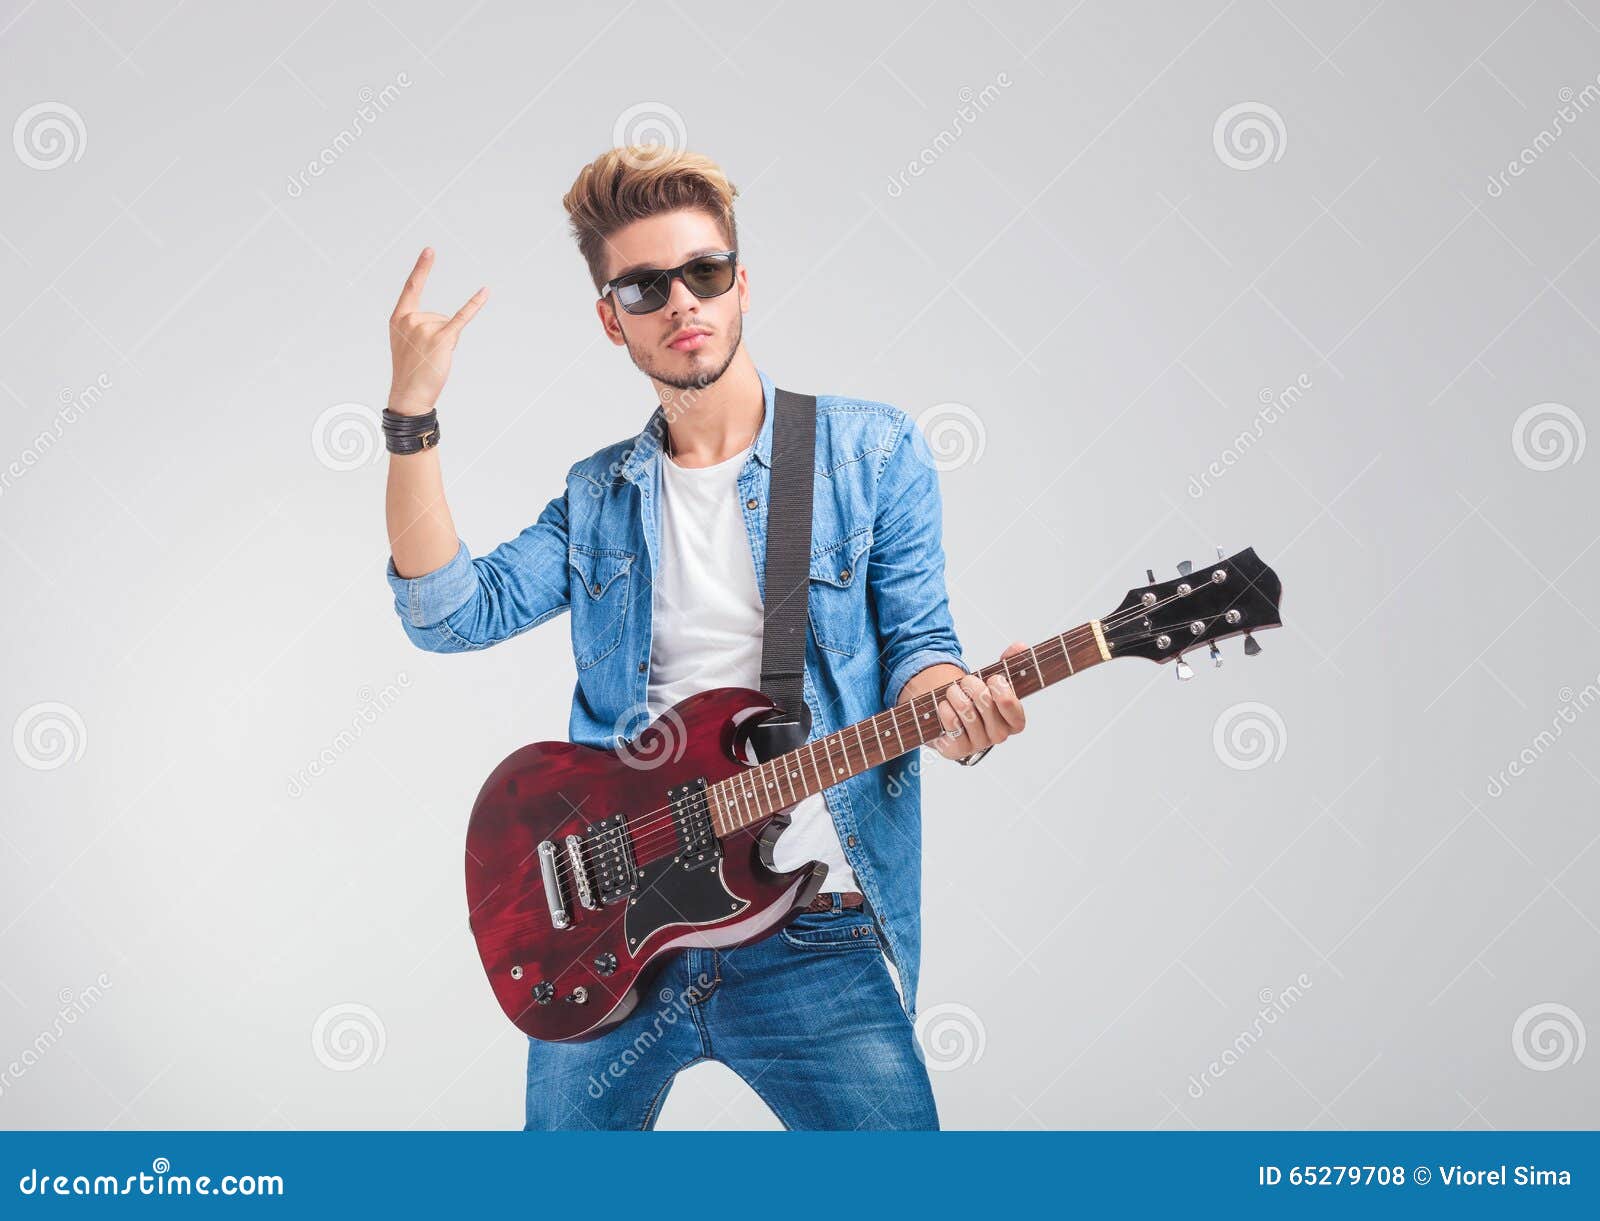 New Photography Poses For Men With Guitar Ideas | Senior boy photography,  Guitar senior pictures, Senior photos boys